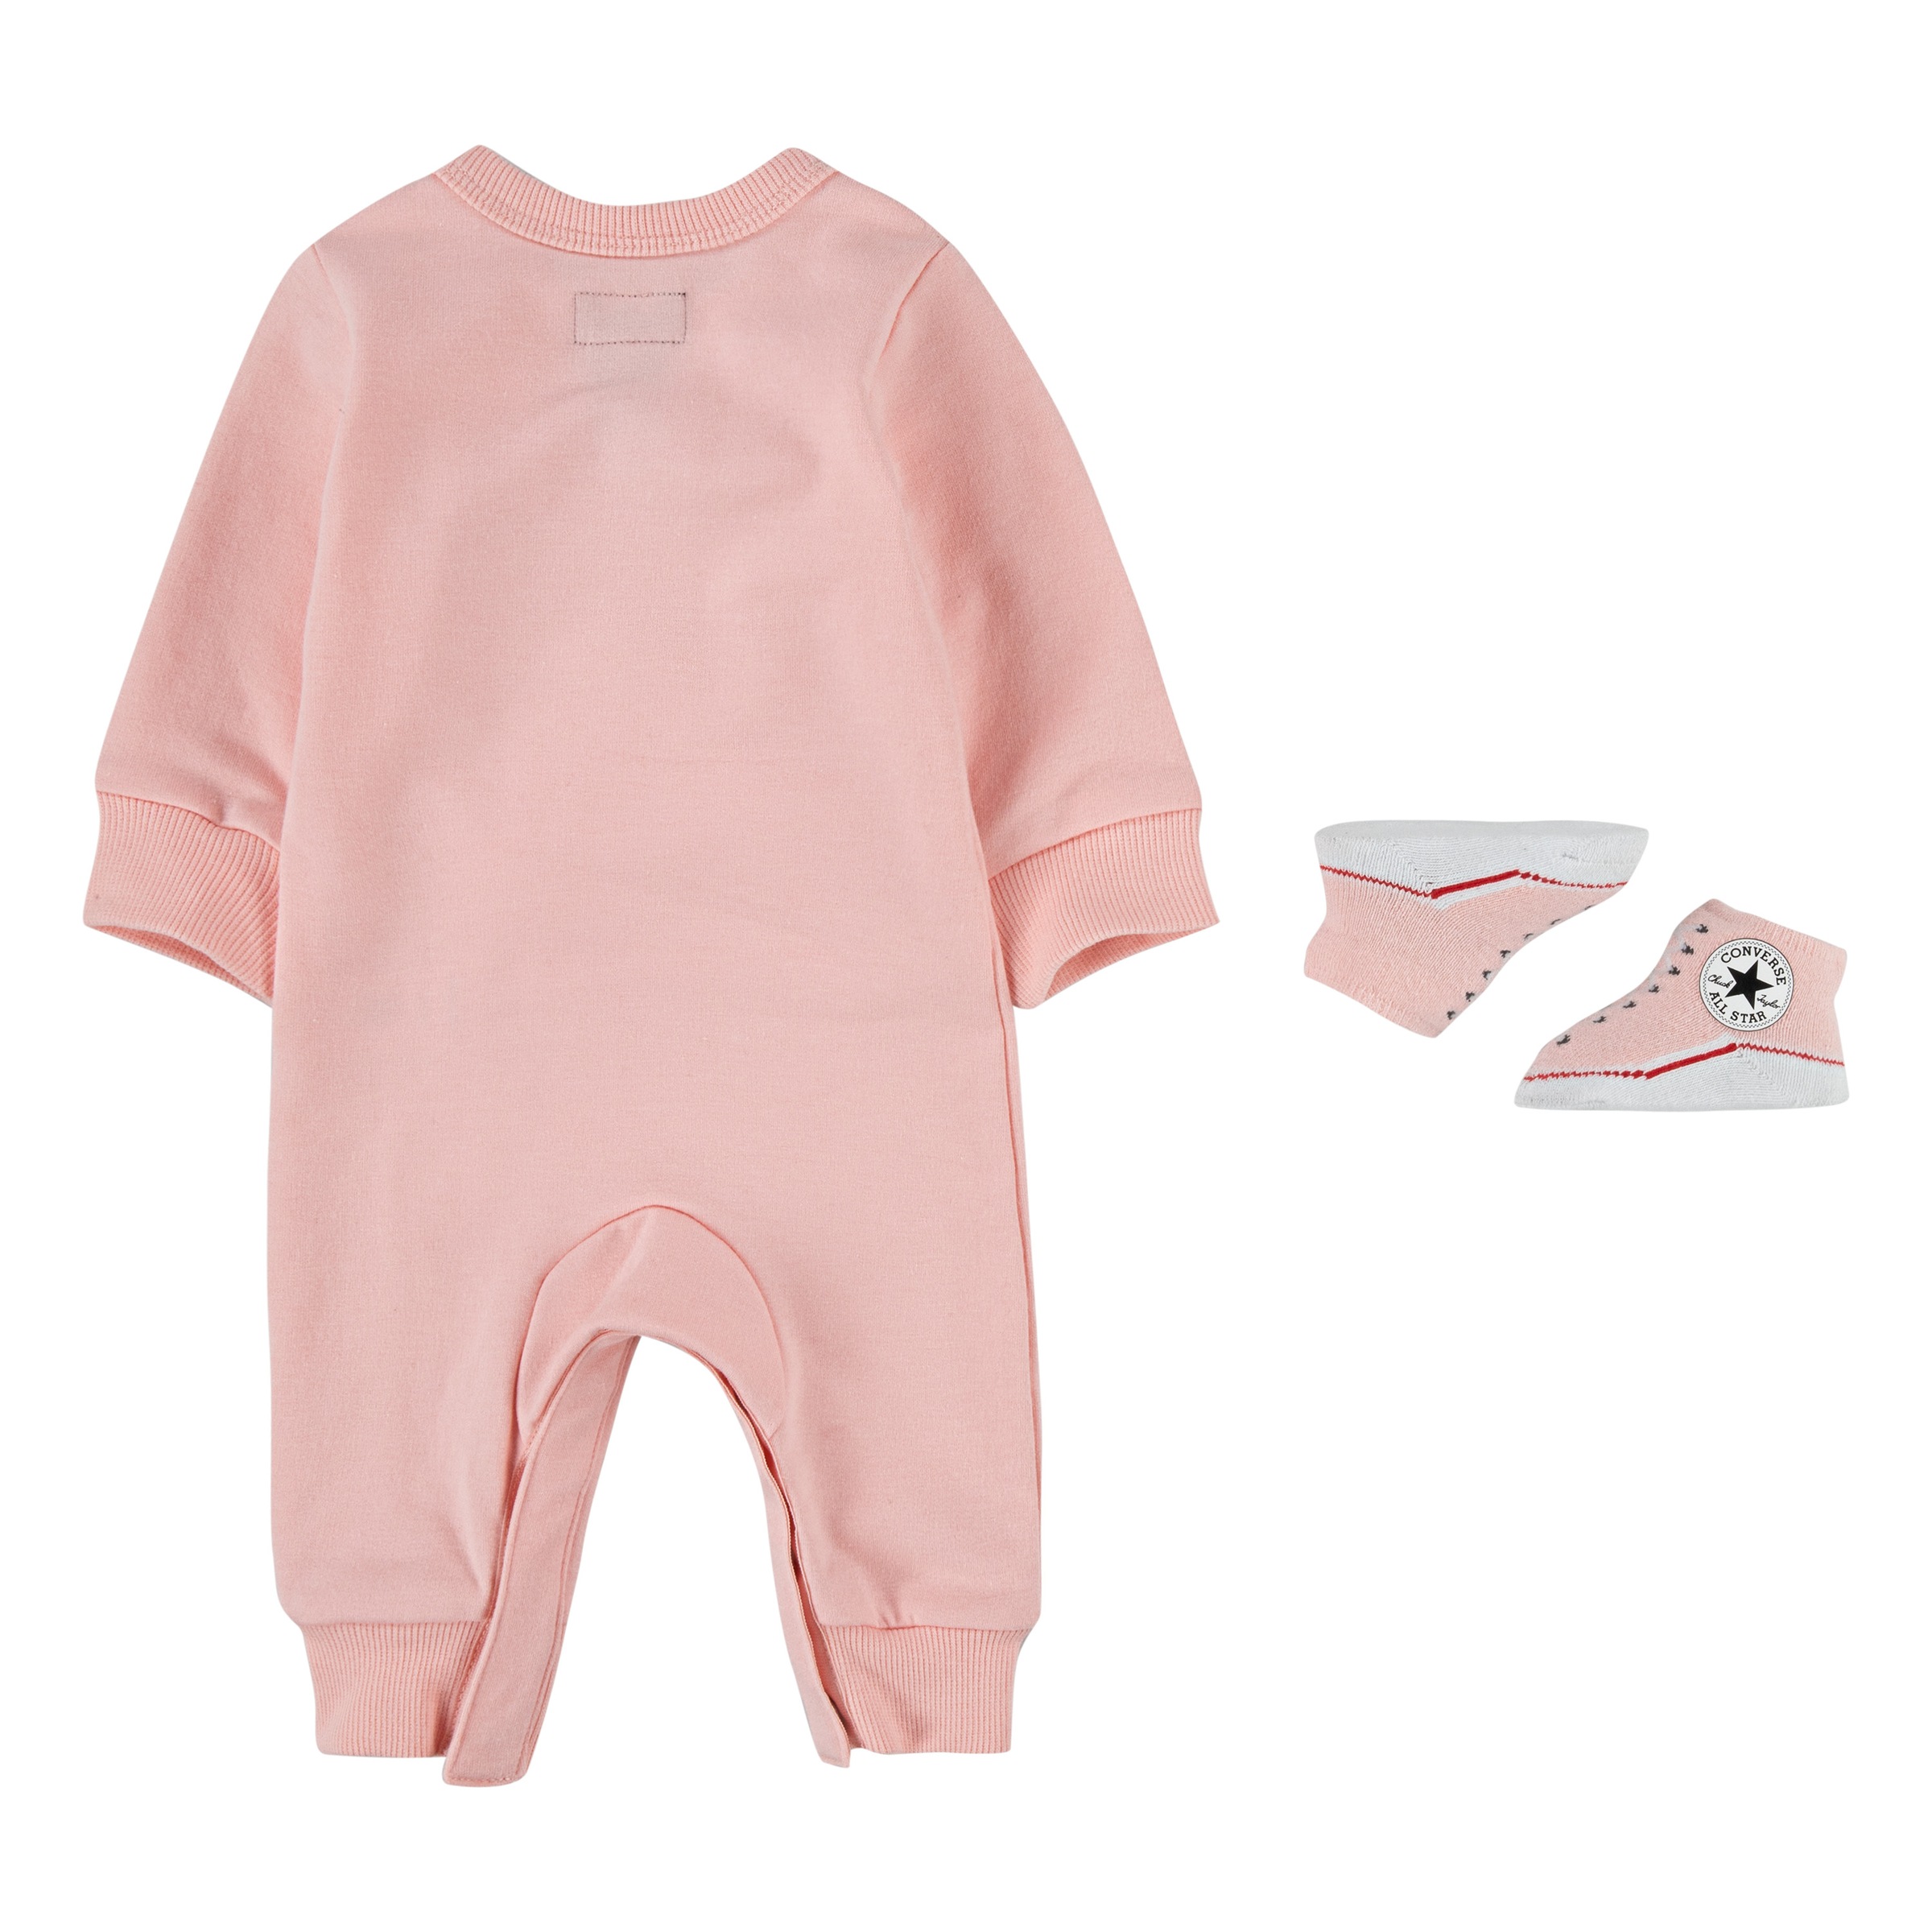 CHUCK OTTO COVERALL Converse W/ Shop »LIL Strampler im Online S«, SOCK (Set) BOOTIE